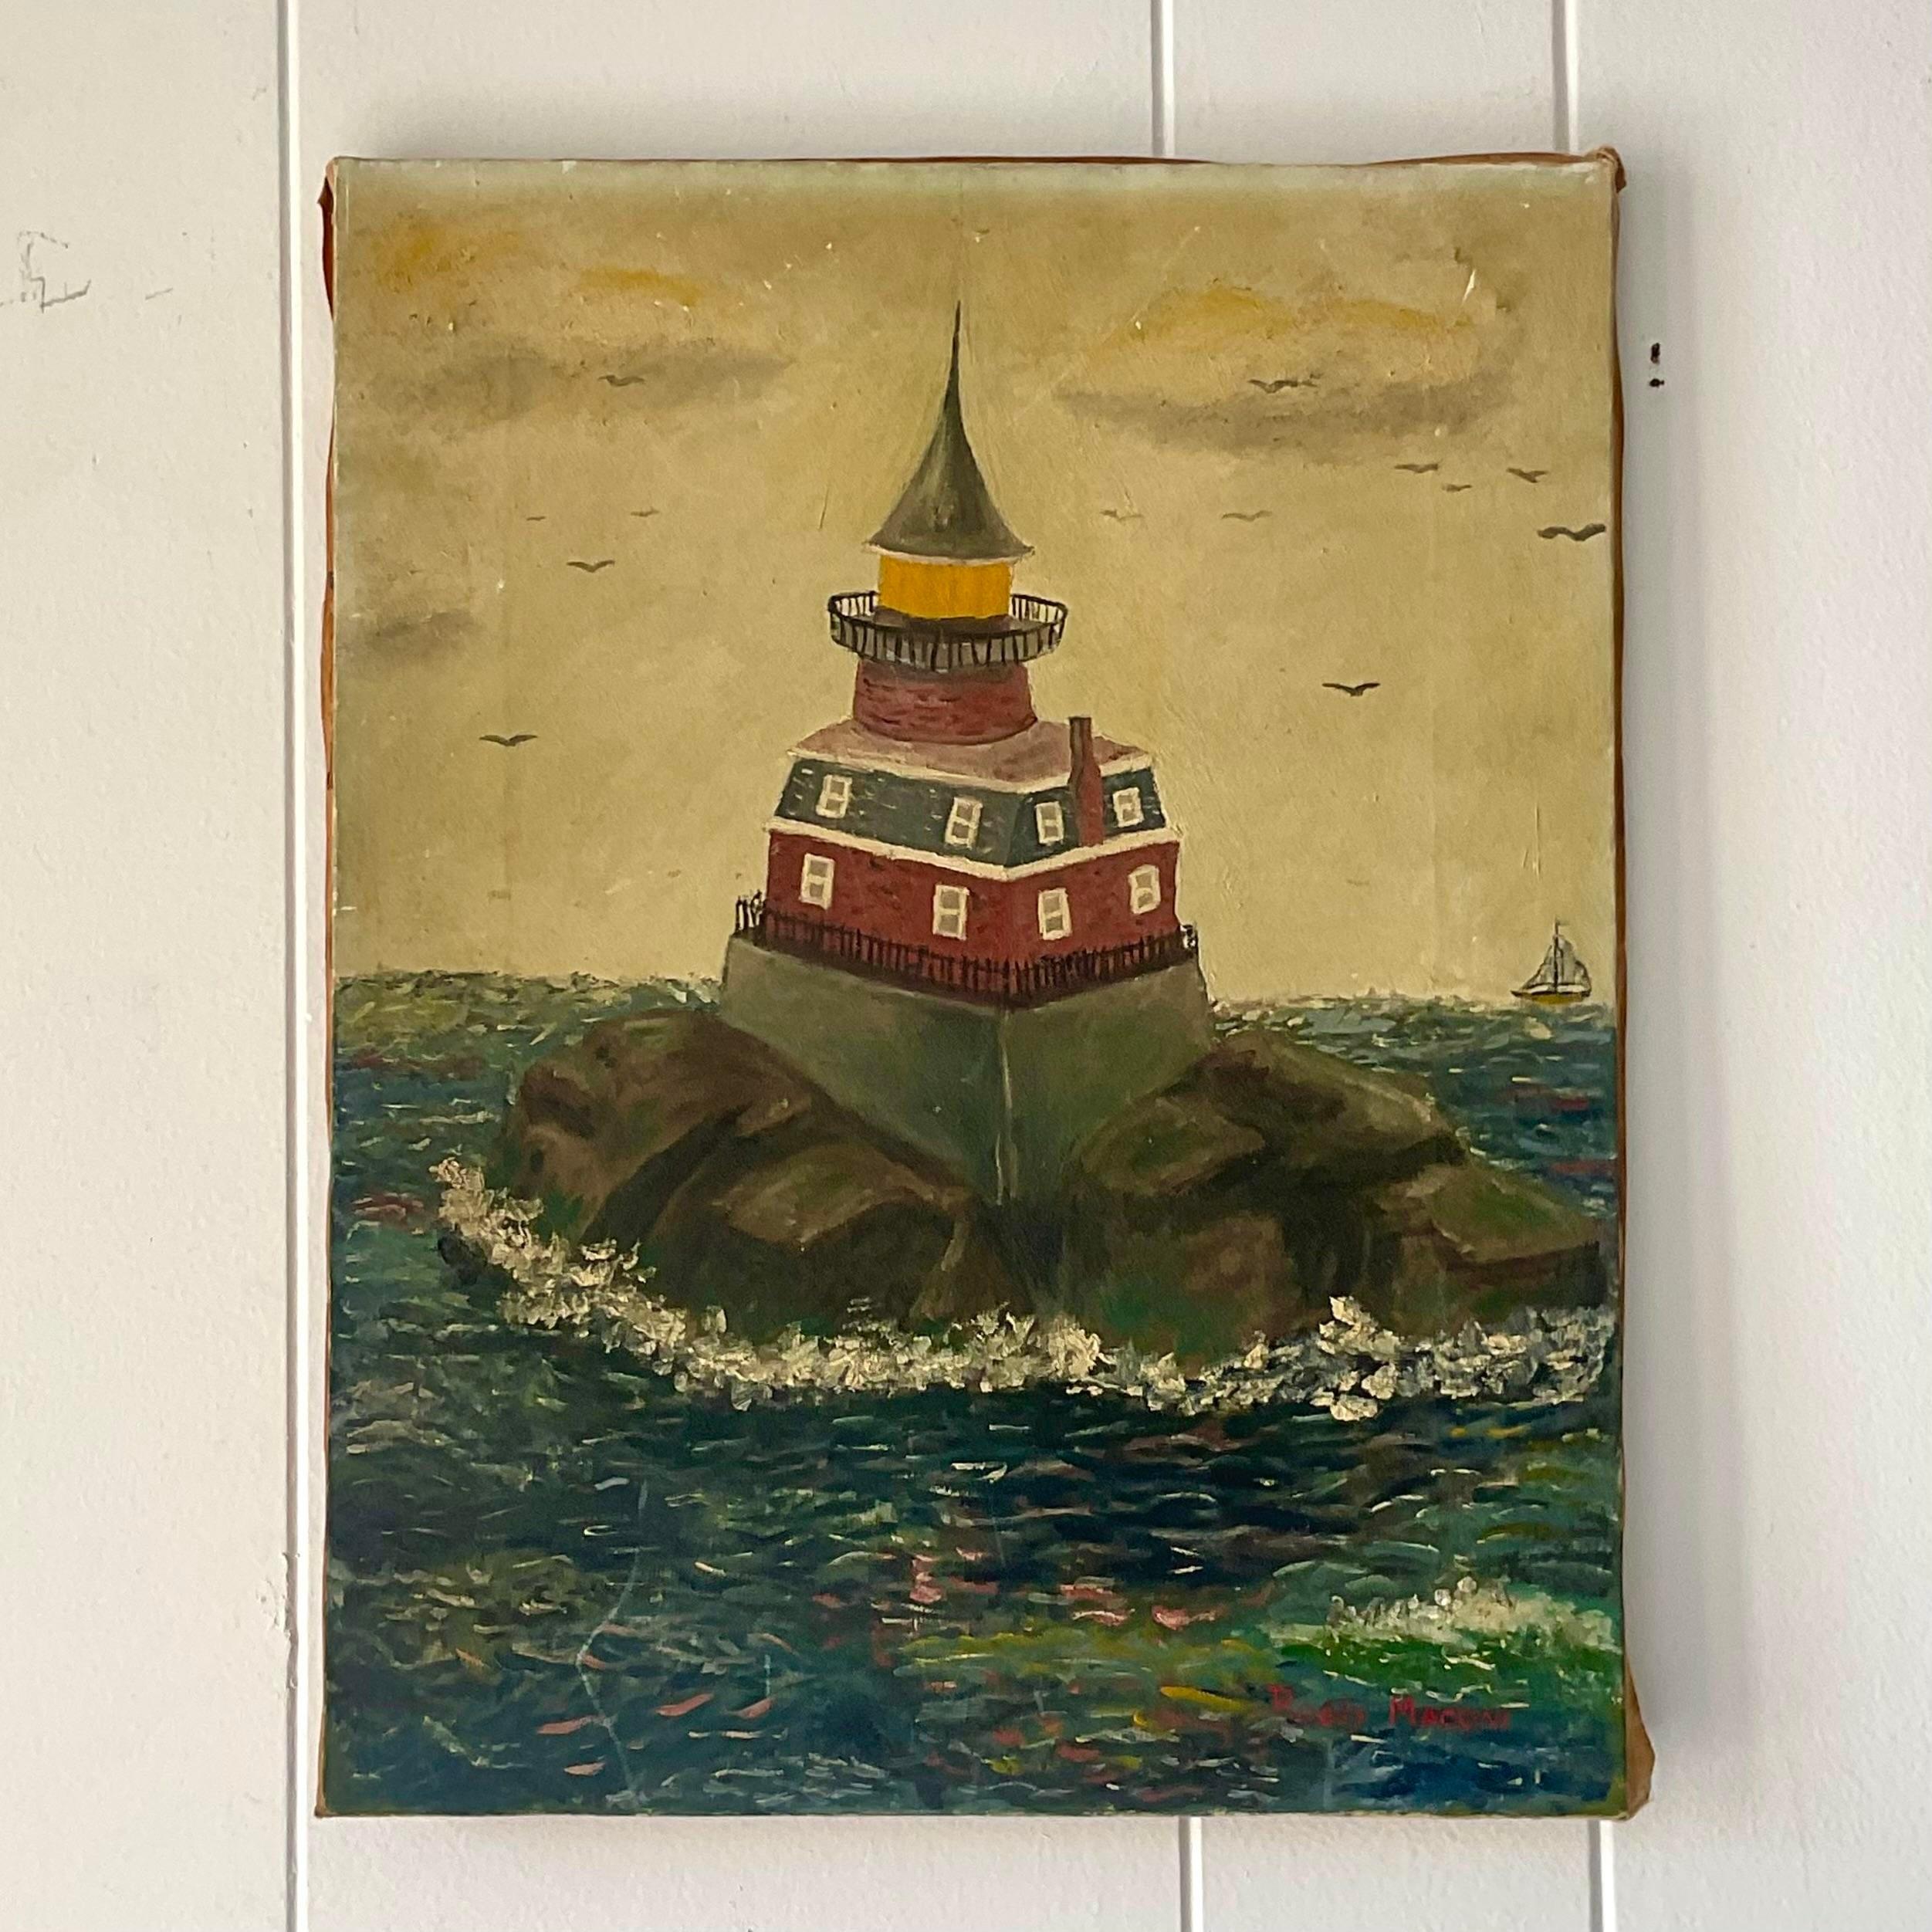 A vintage a boho signed original oil painting on canvas. A chic painterly composition of a lighthouse. A quirky vision in muted colors. Acquired from a Palm Beach estate.